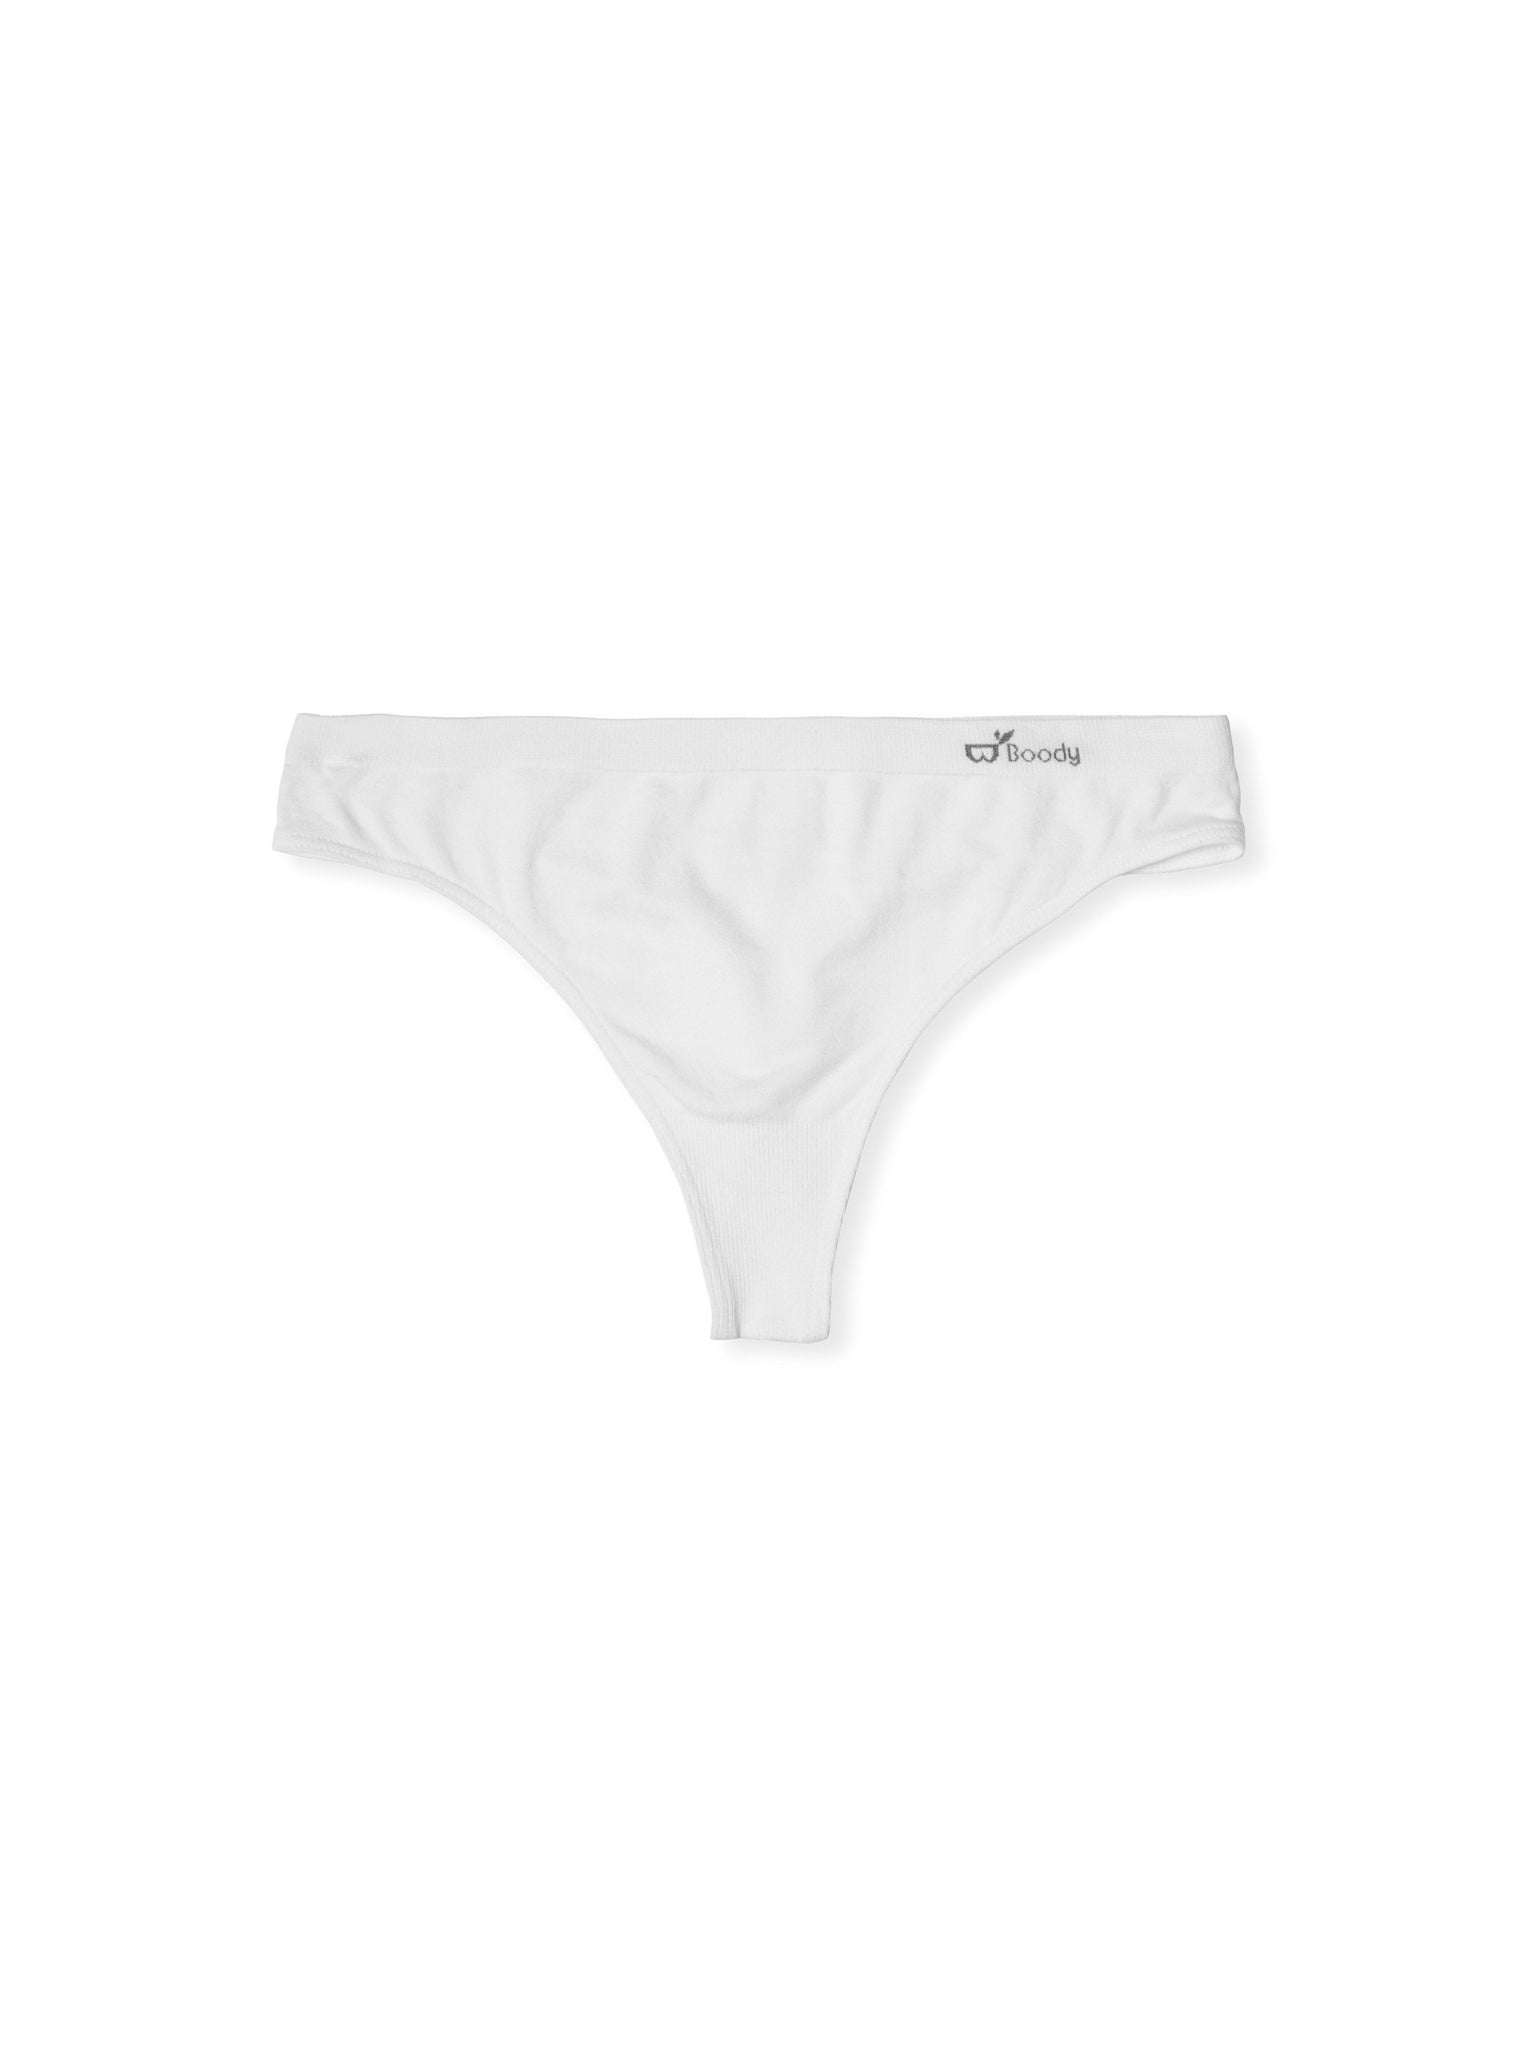 Boody Organic Bamboo G-String – ecotique